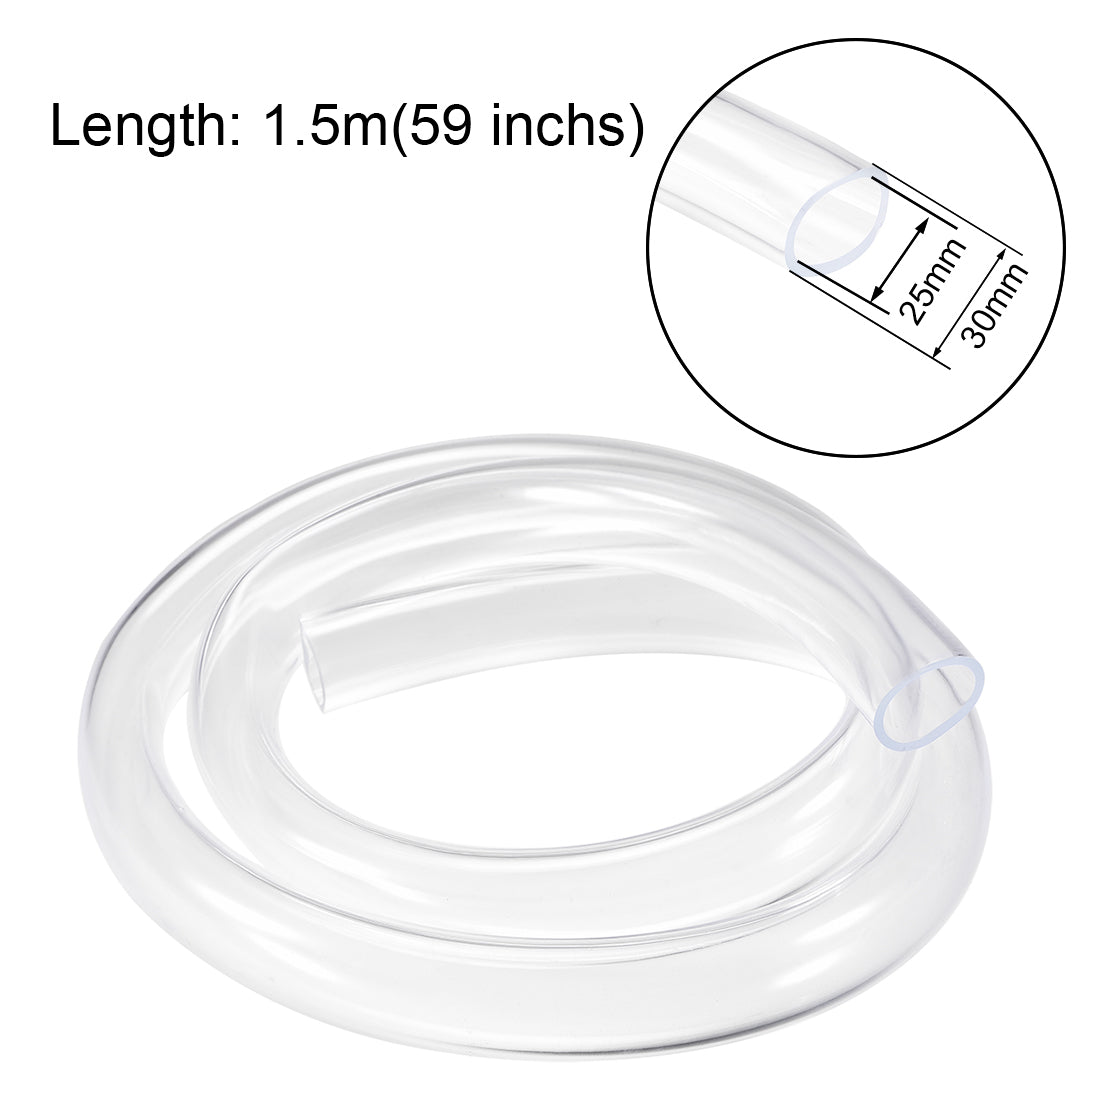 uxcell Uxcell PVC Hose Tube, 25mm(0.98") ID x 30mm(1.18") OD 1.5m Clear Vinyl Tubing